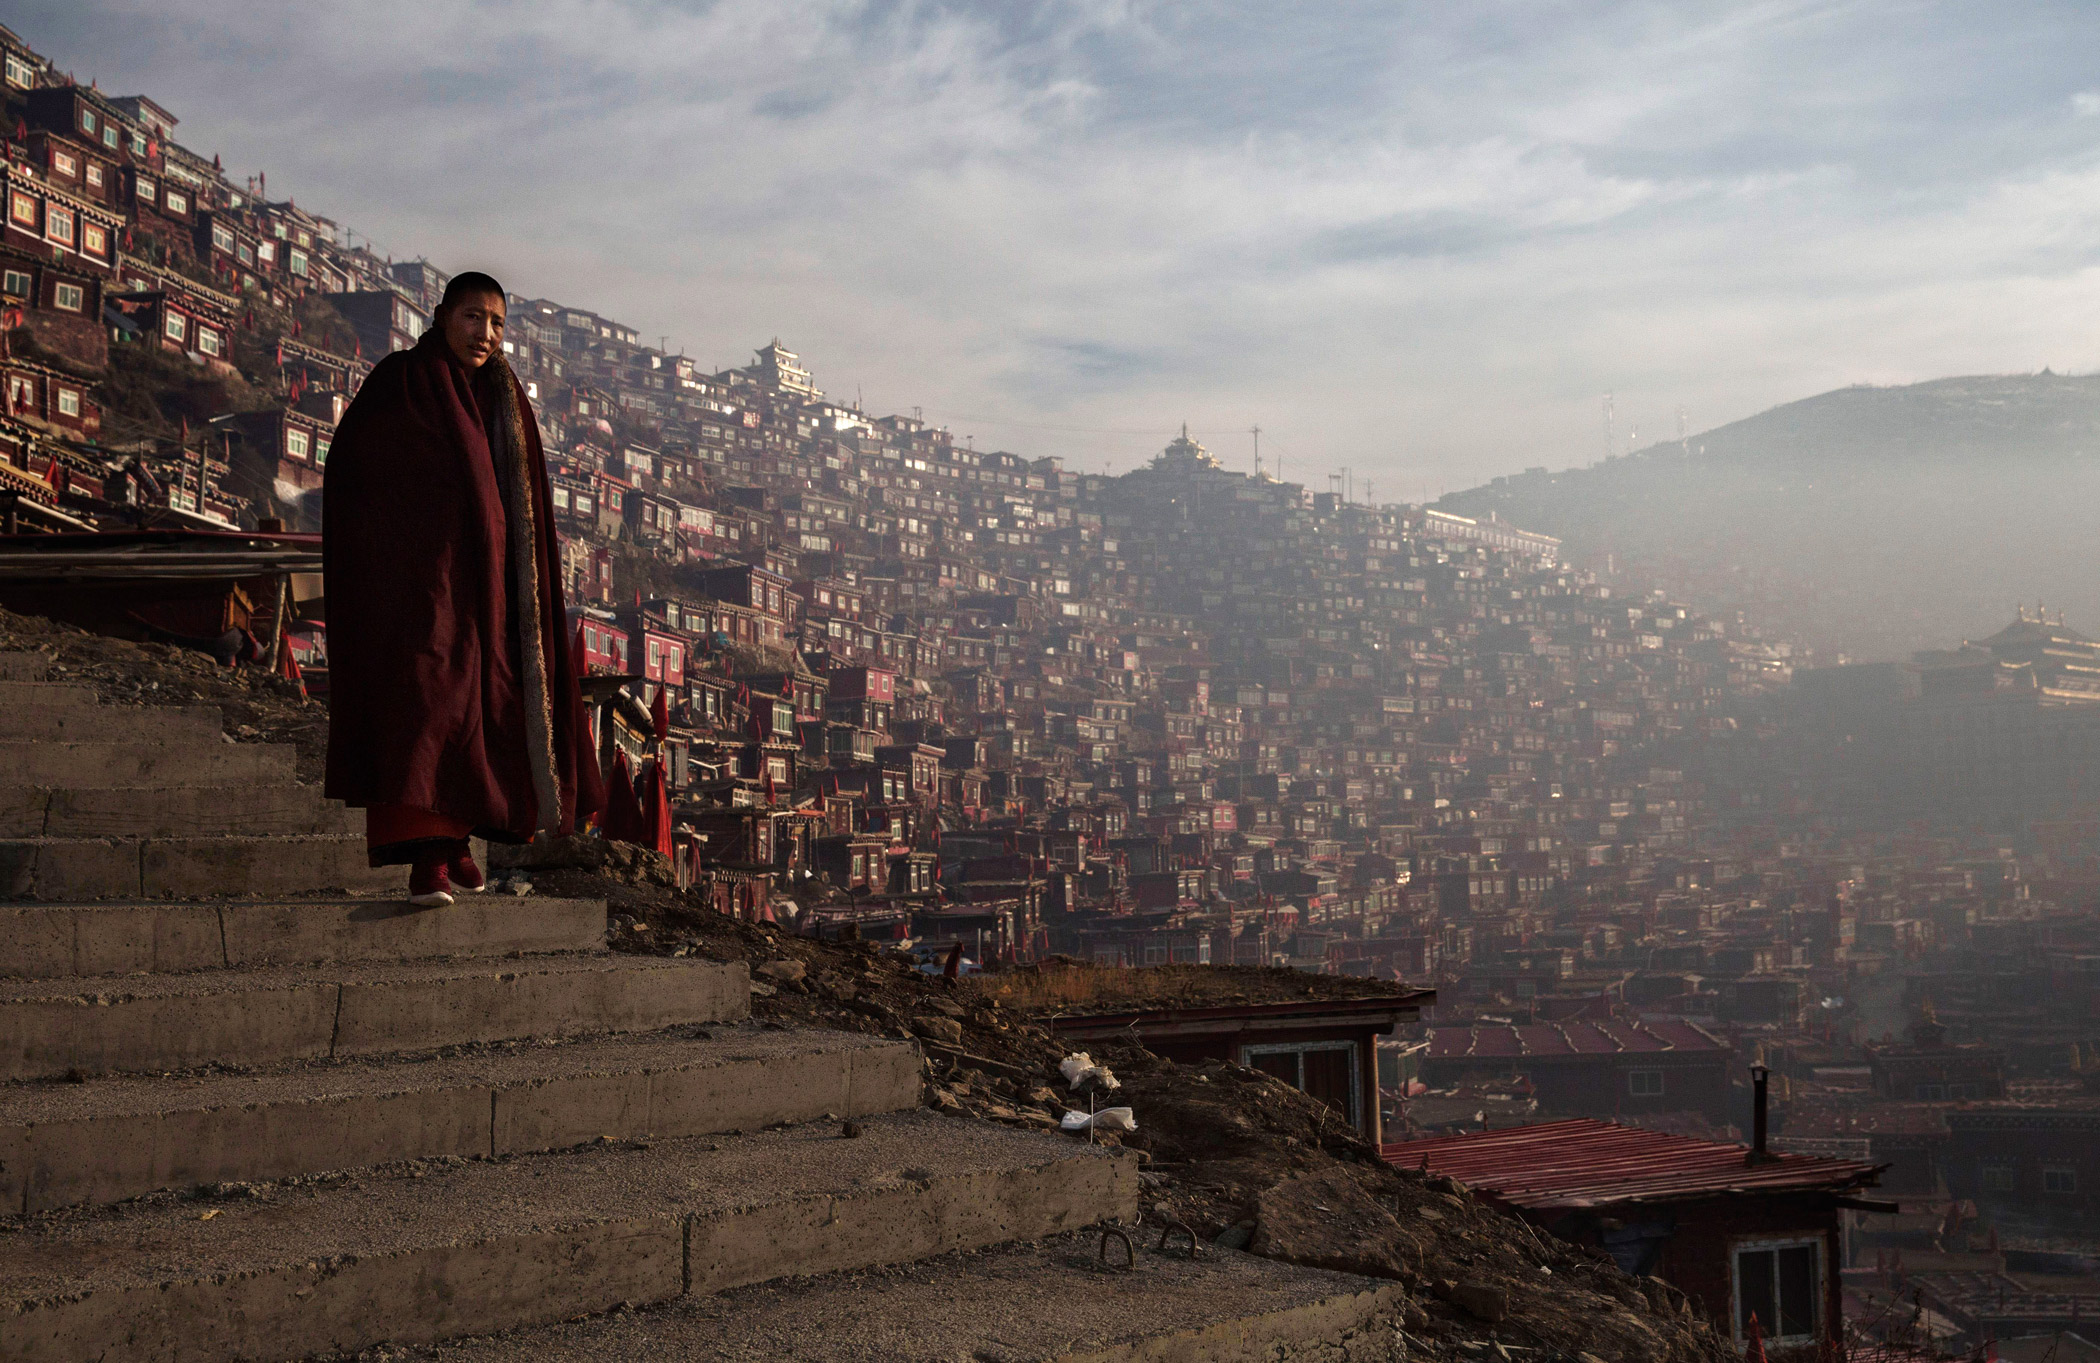 A Tibetan Buddhist nun walks passed dwellings on her way to a chanting session.